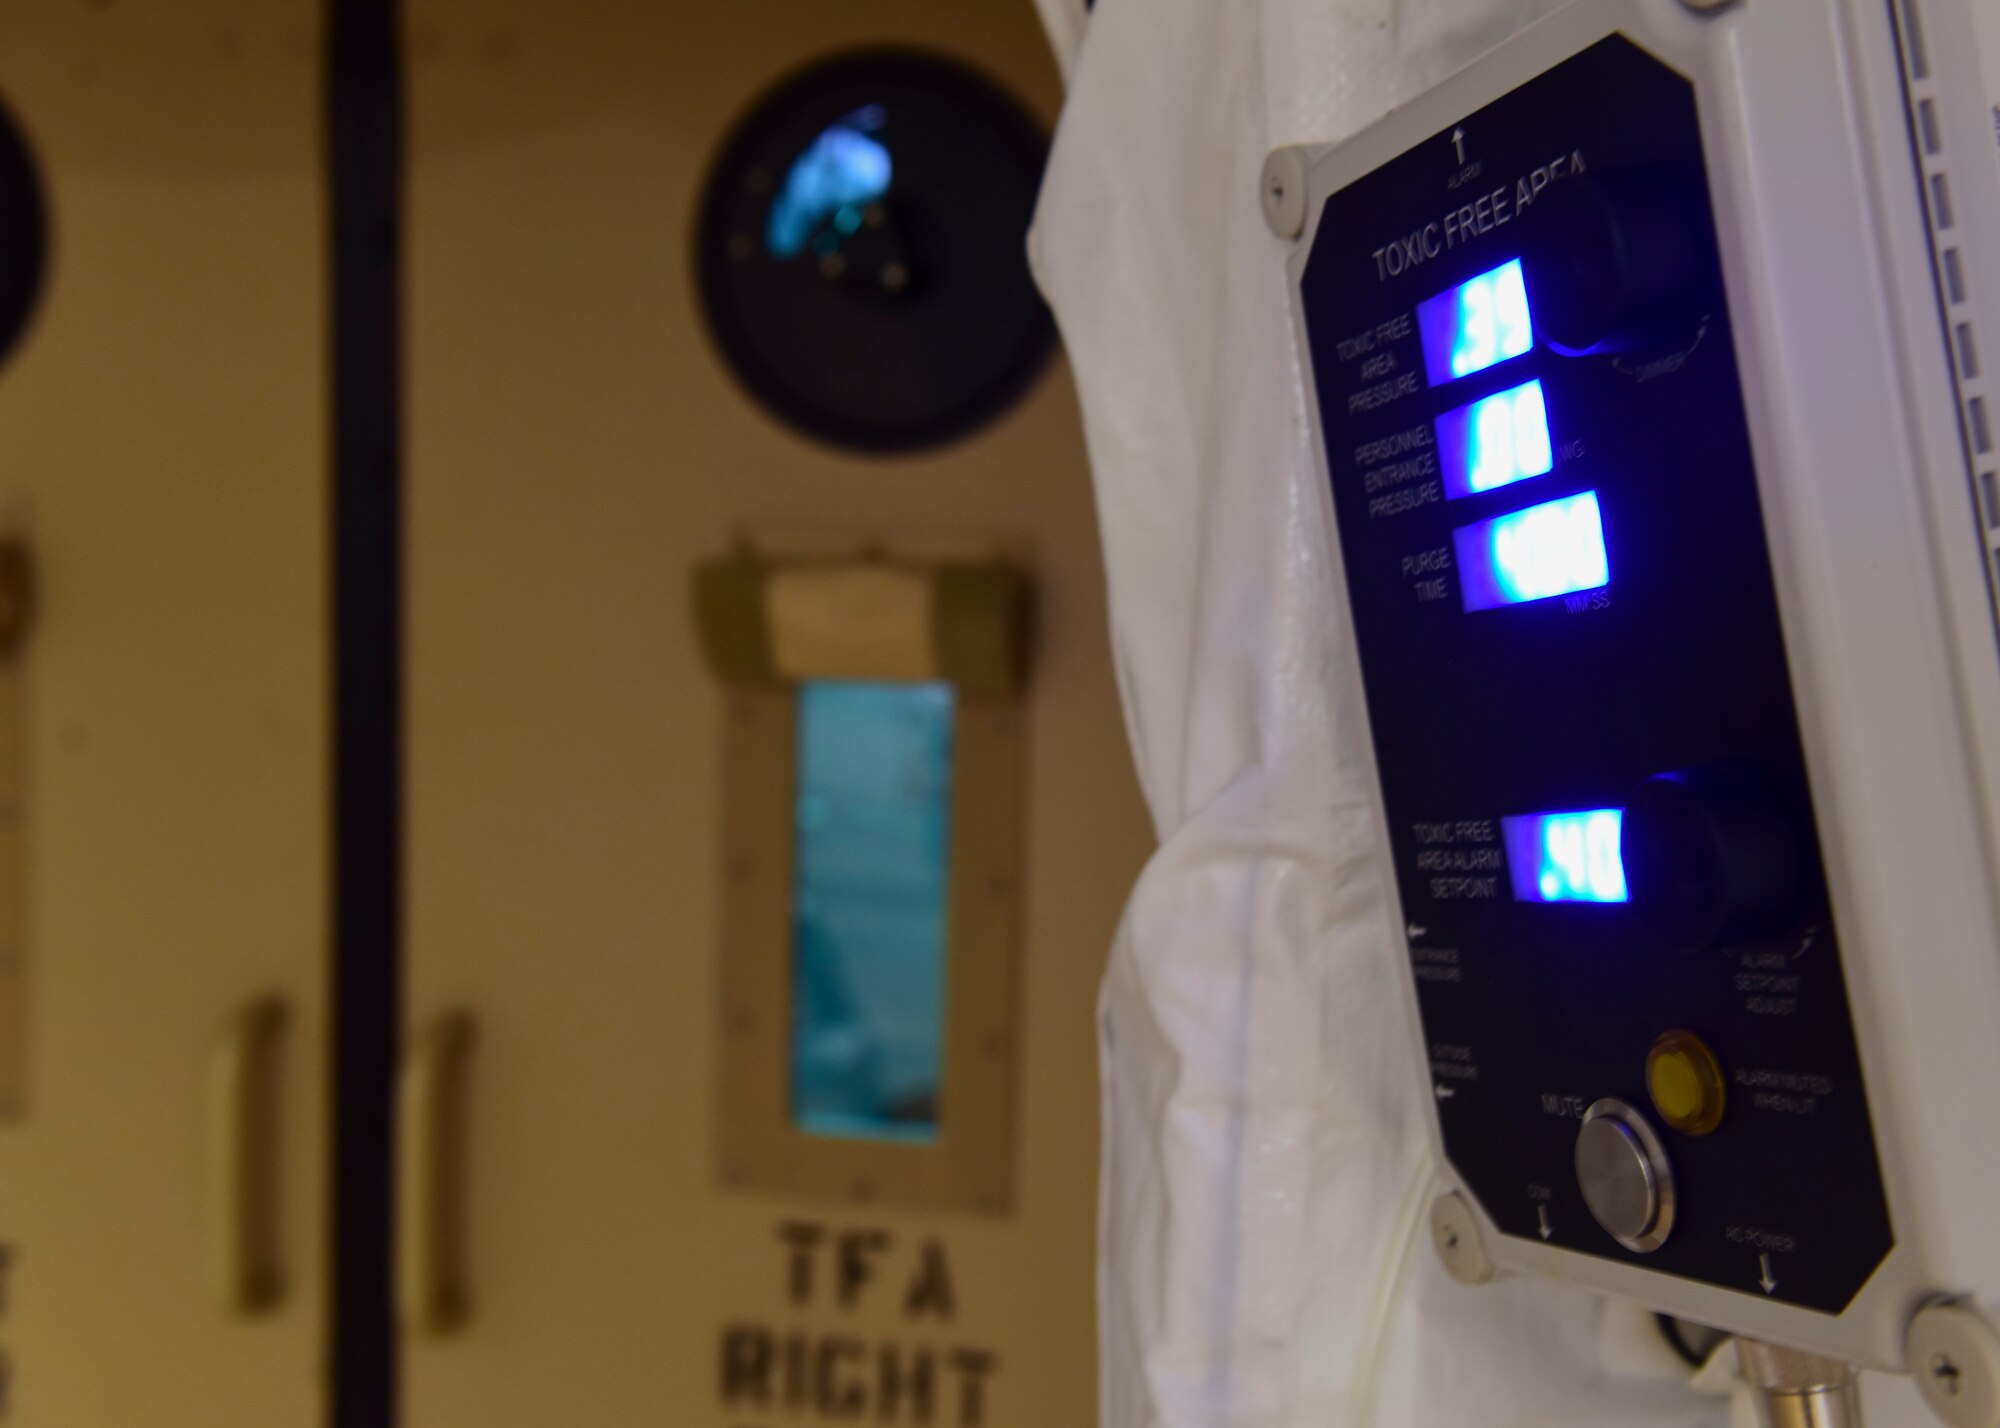 Collective protection equipment displays air status at Joint Base Langley-Eustis, Virginia, June 20, 2018. A new feature demonstrated during the Expeditionary Medical Systems exercise enables medical personnel to work in an over-pressurized, toxic-free environment without the need for full Mission Oriented Protective Posture. (U.S. Air Force photo by Airman 1st Class Monica Roybal)